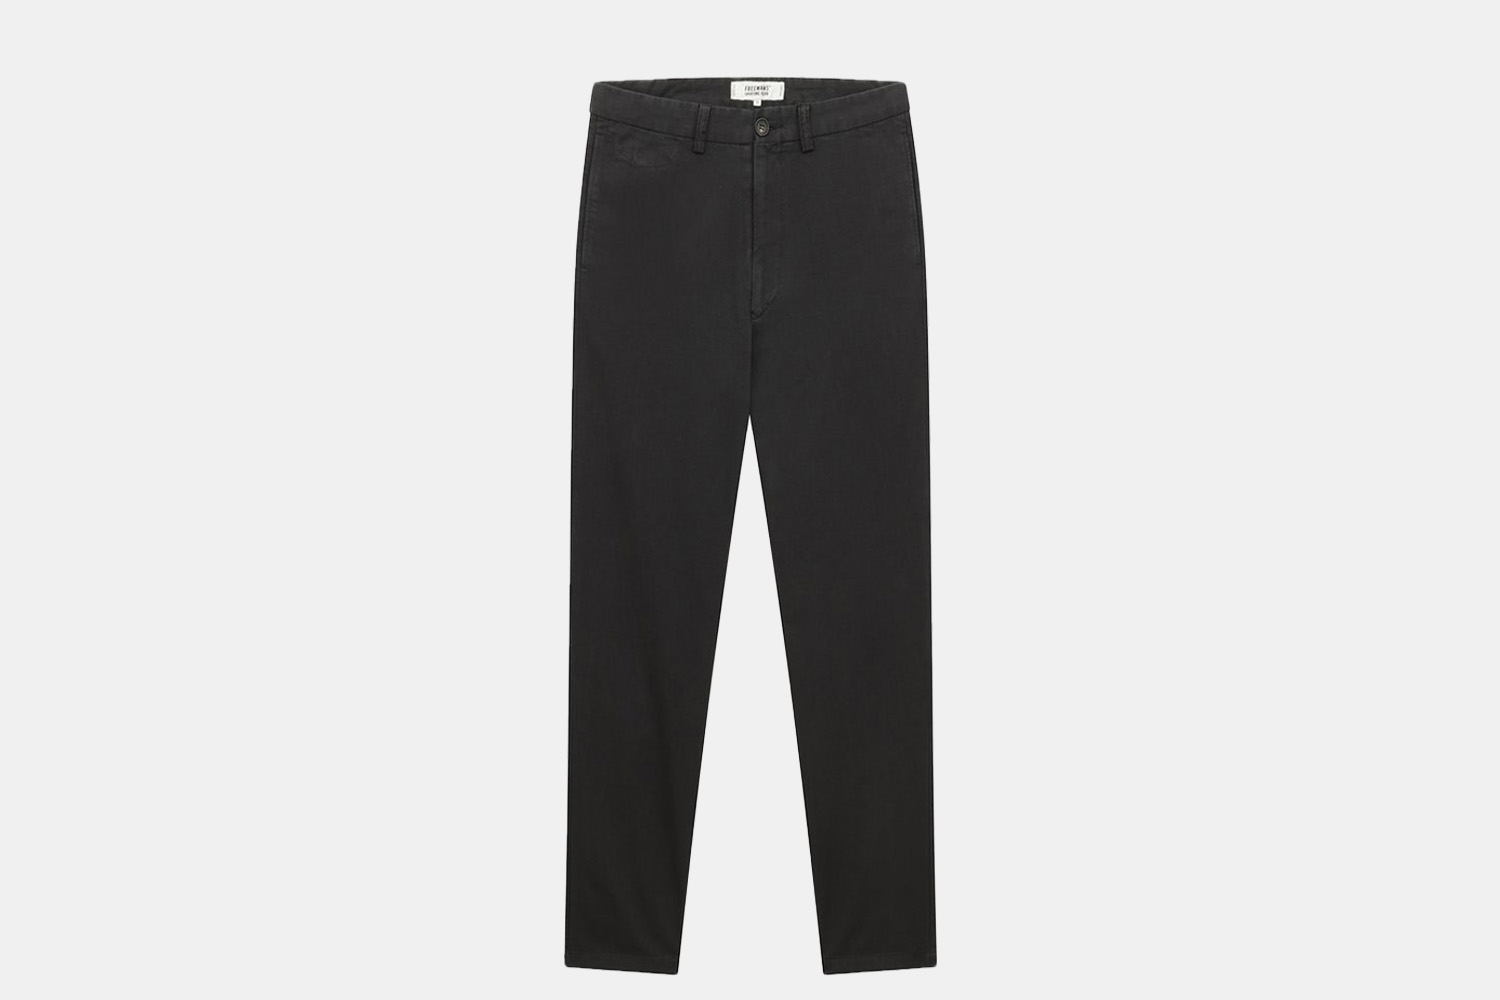 a pair of black chino trousers.